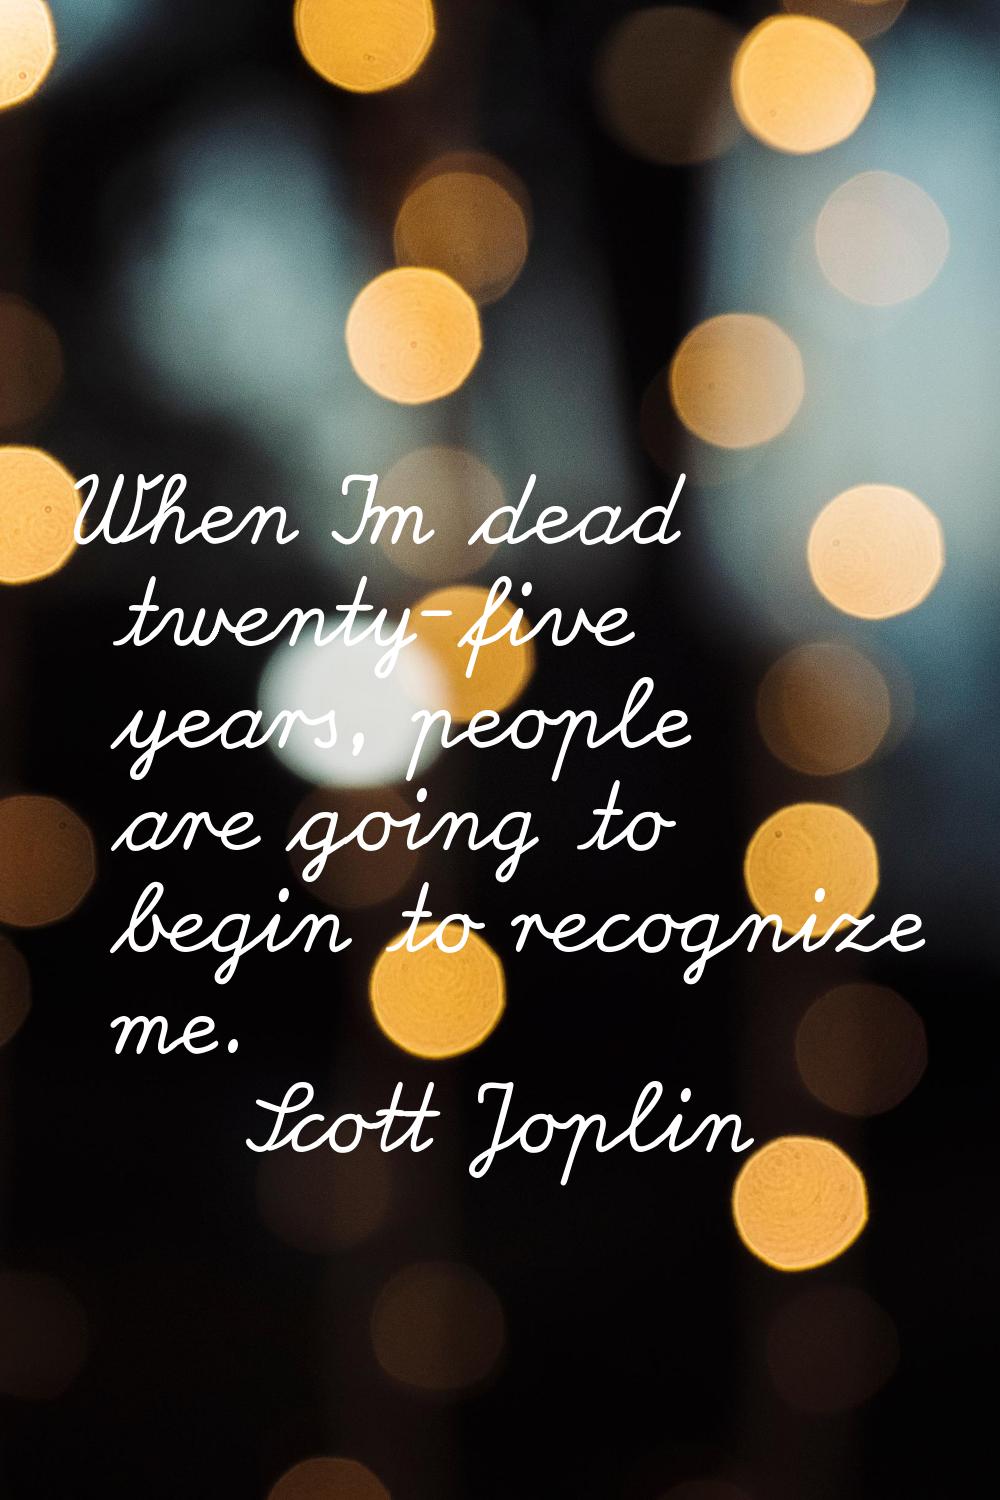 When I'm dead twenty-five years, people are going to begin to recognize me.